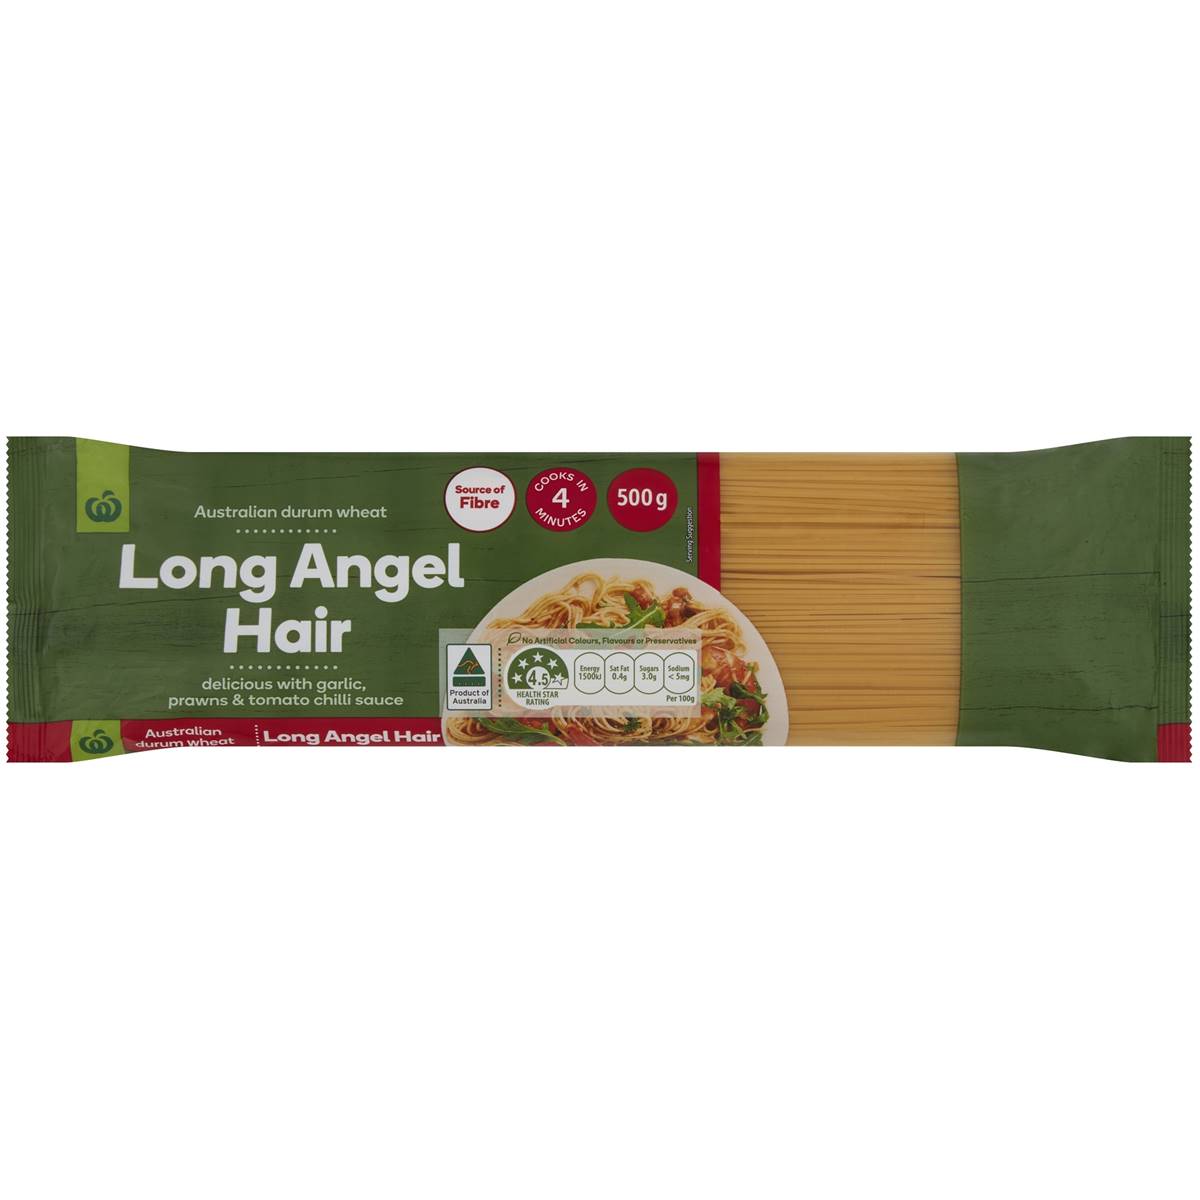 Woolworths Select Long Angel Hair Pasta